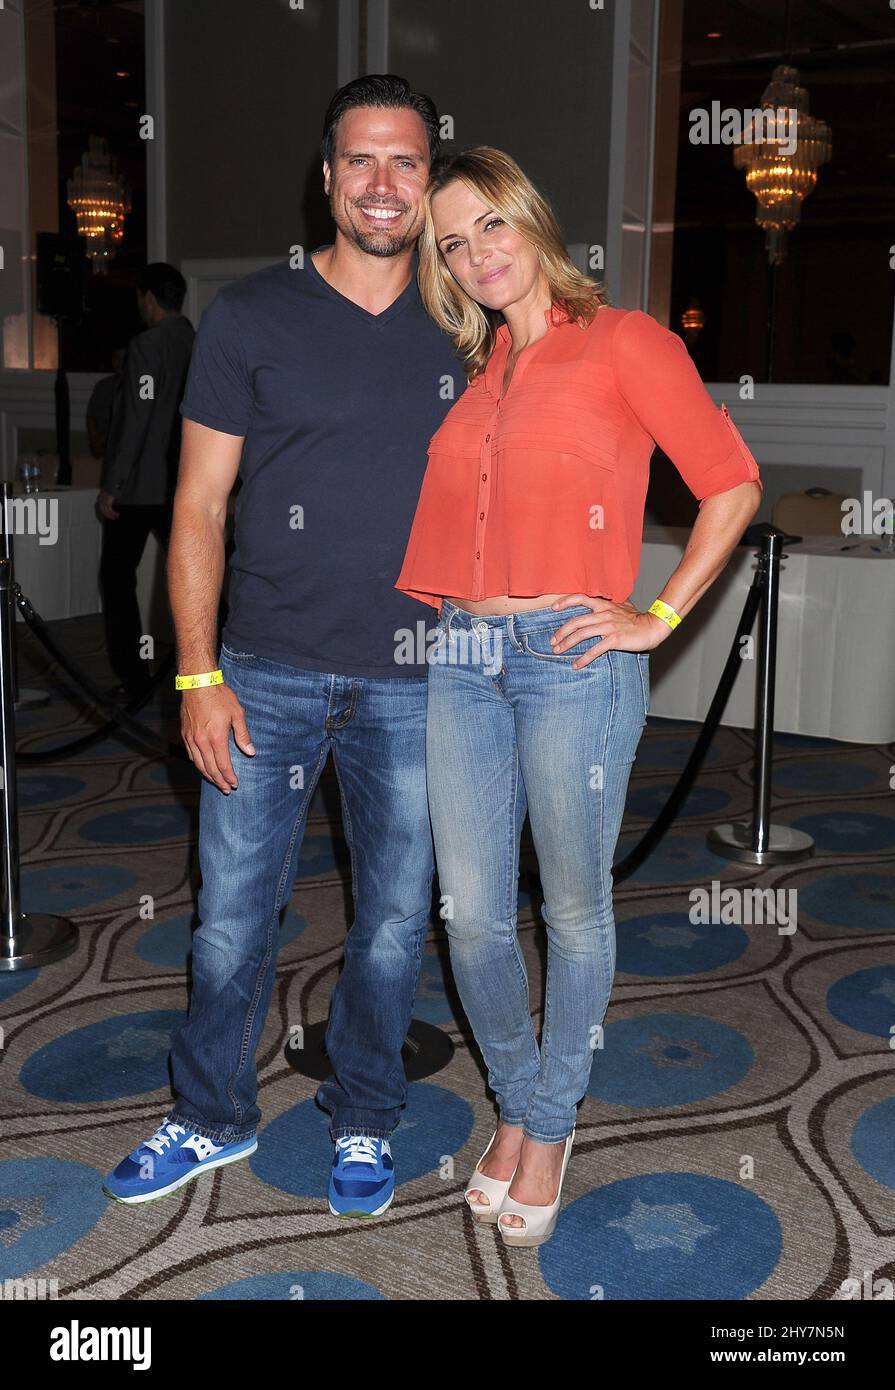 Joshua Morrow and Kelly Sullivan attending 'The Young and the Restless' Fan Club Event Stock Photo